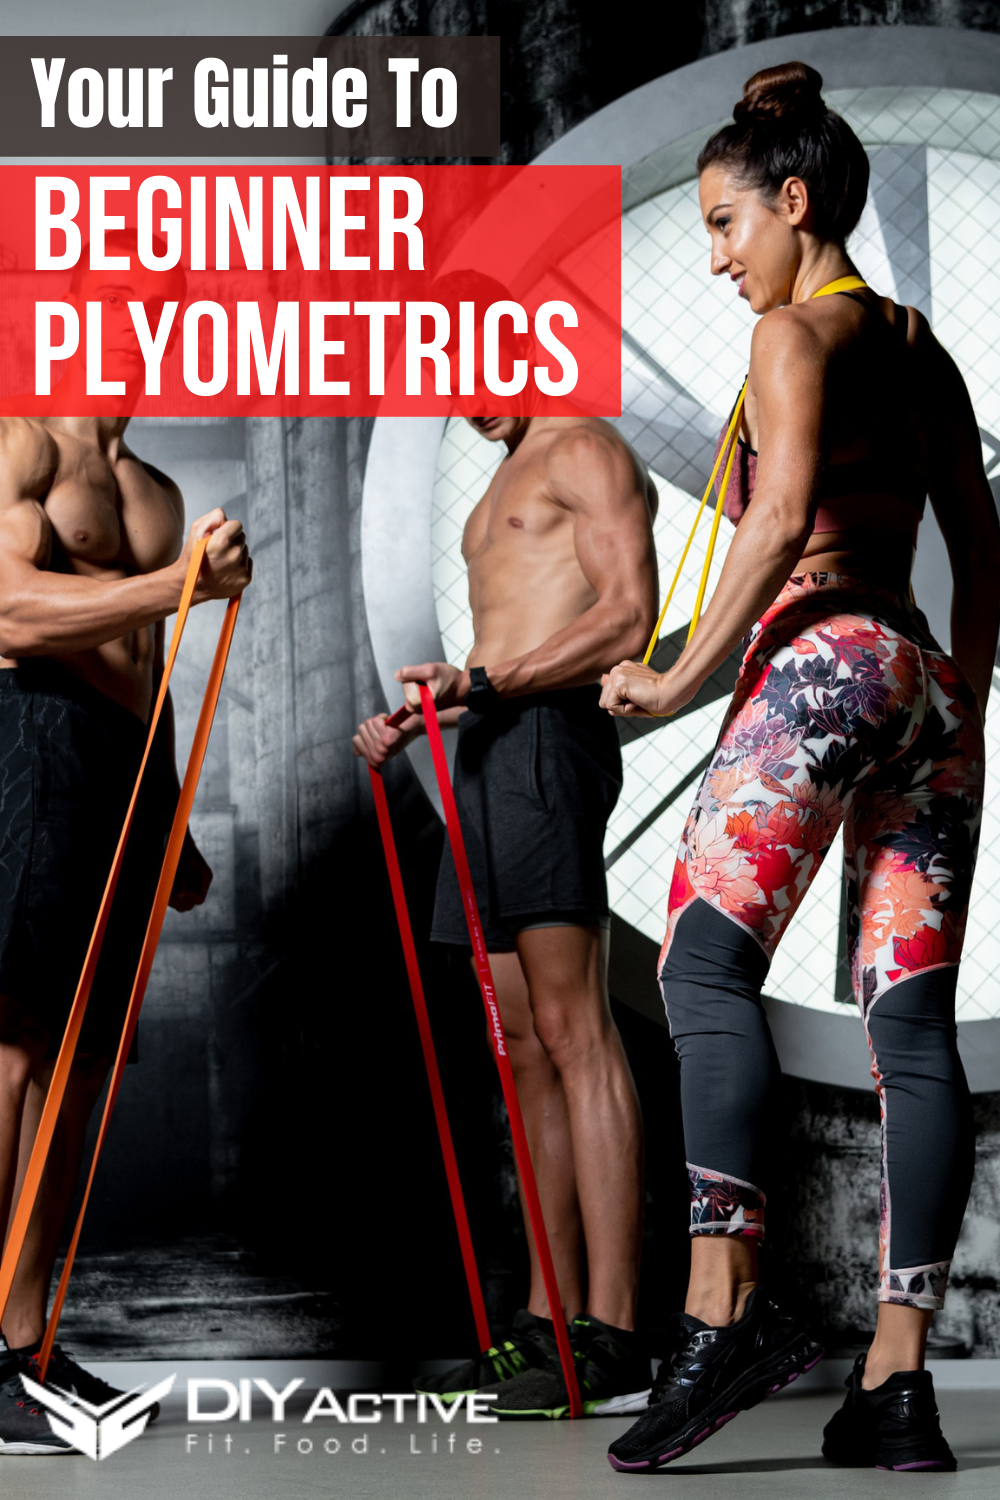 Your Guide To Beginner Plyometrics and Getting Started